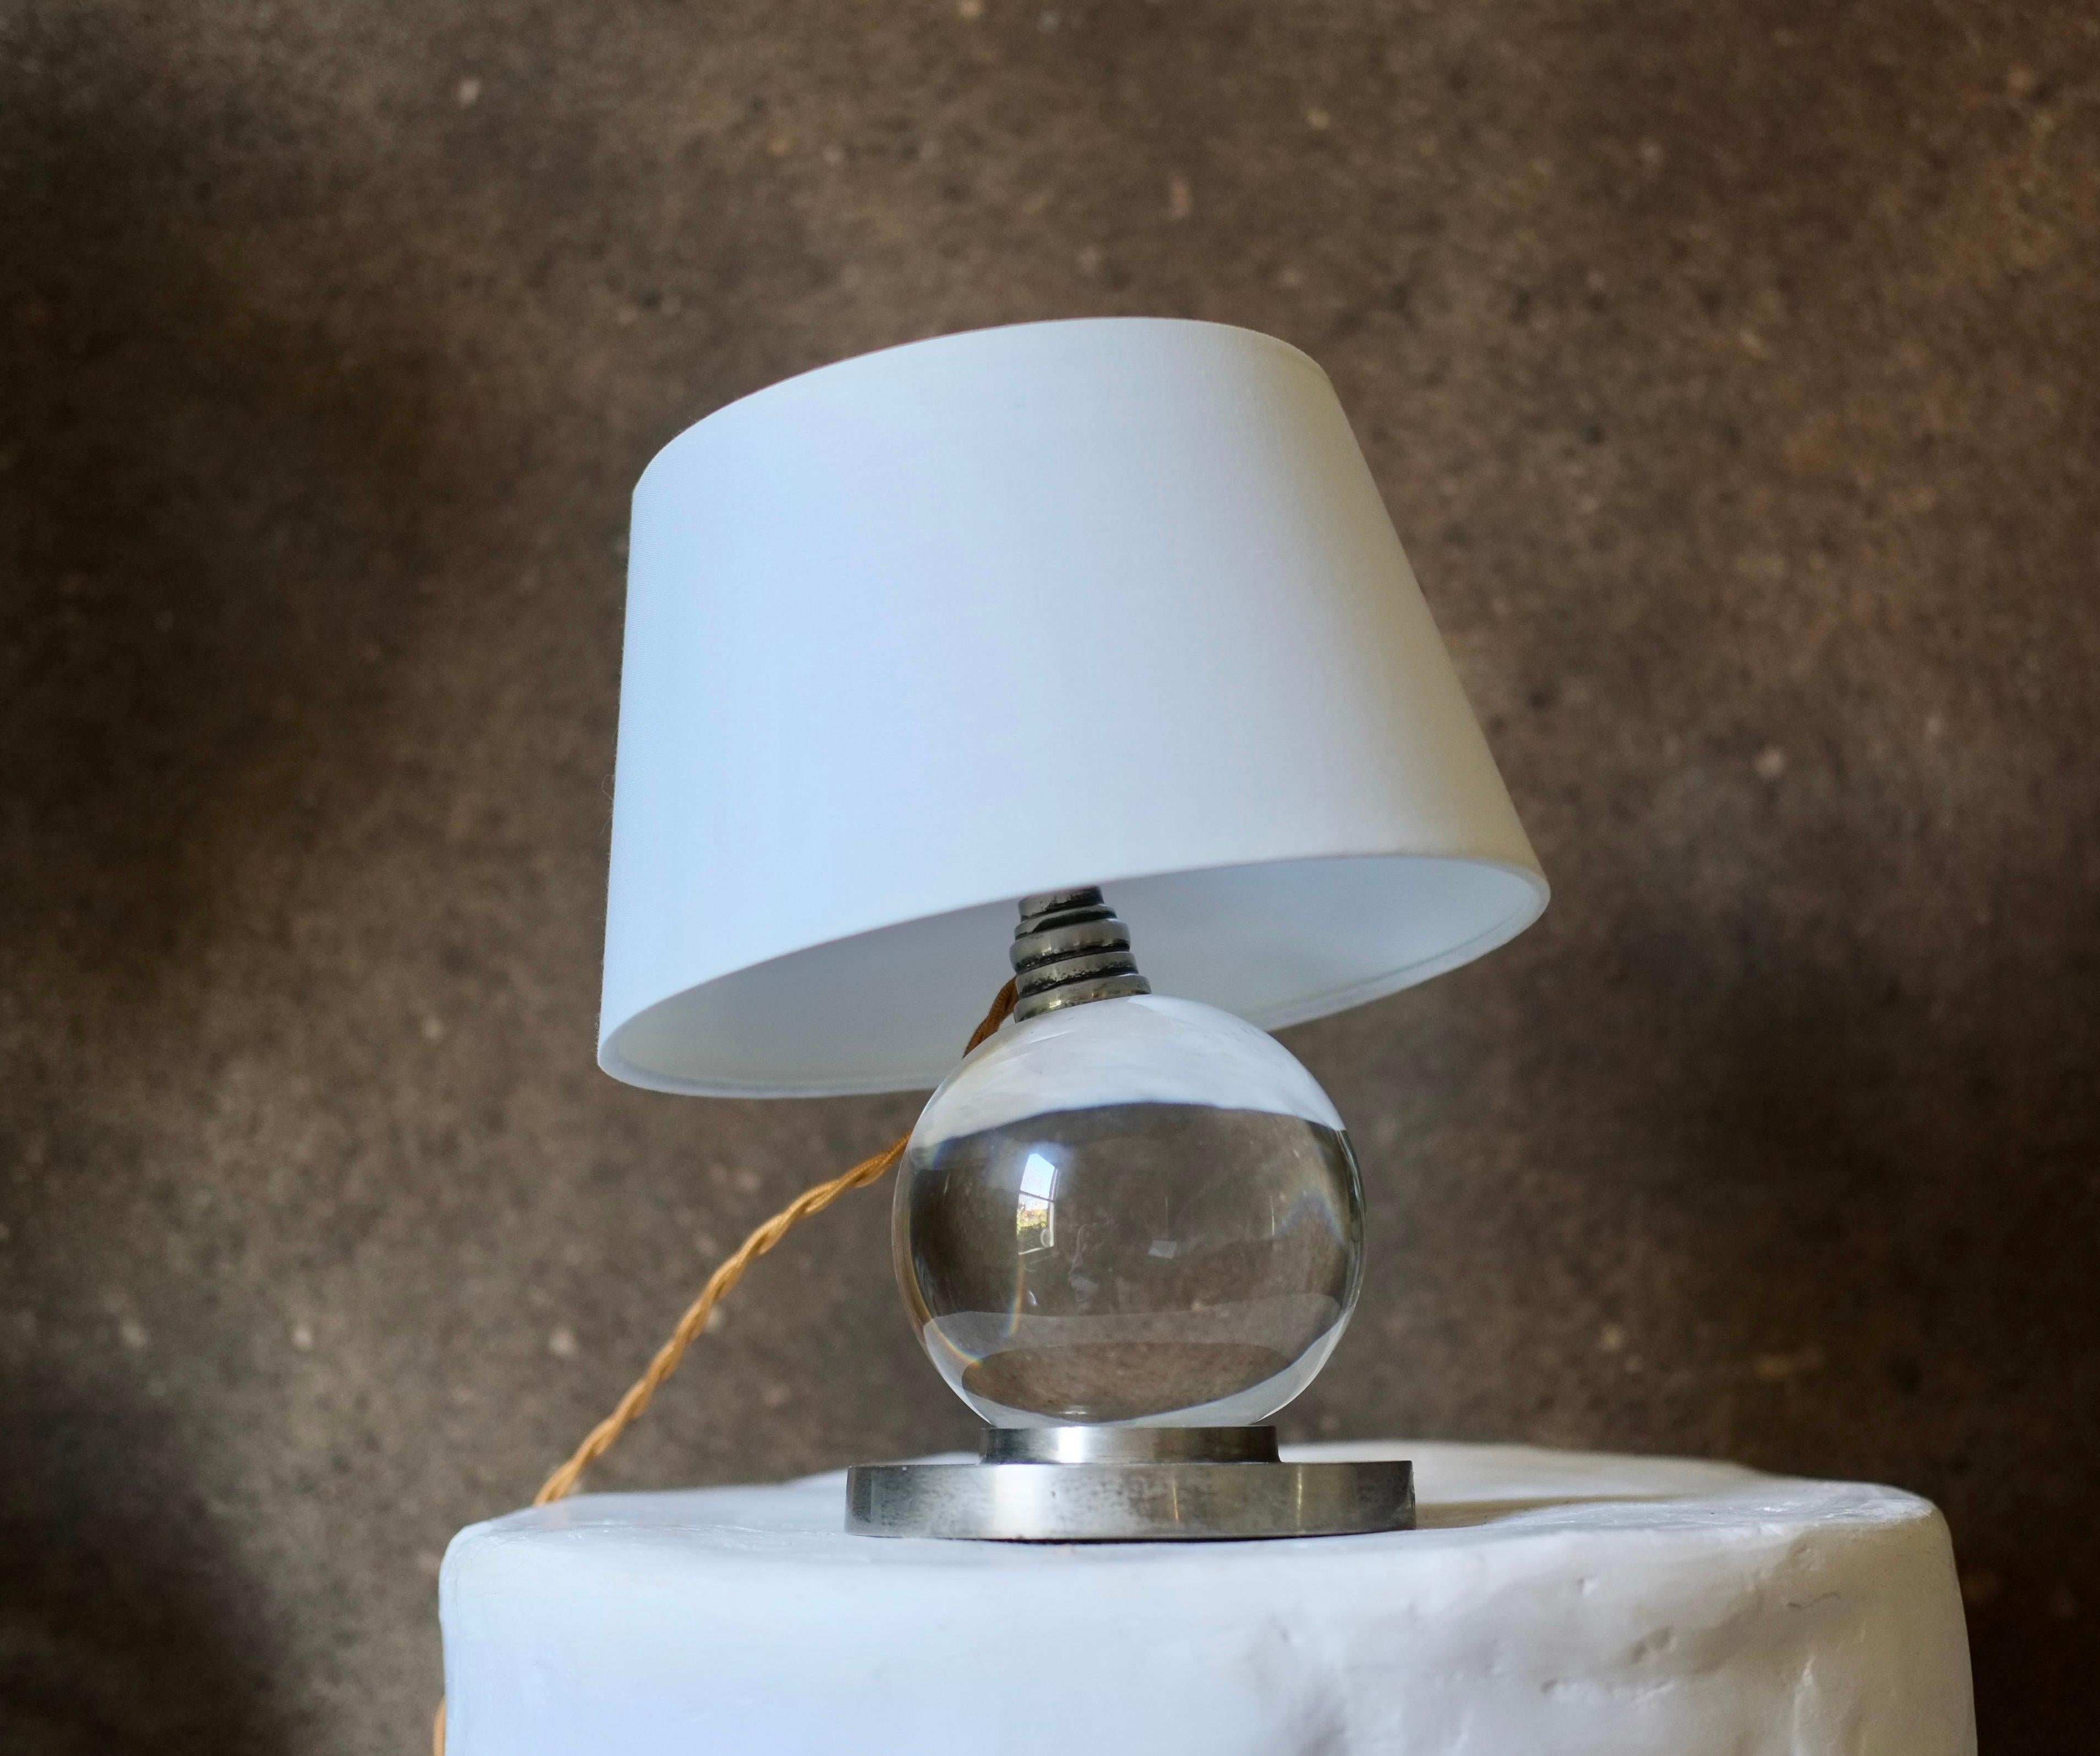 A crystal glass ball lamp mounted on a metal base attributed to Jacques Adnet.

Rewired and fitted with a UK plug. 

Dimensions including shade H 24 Dia 20 cm